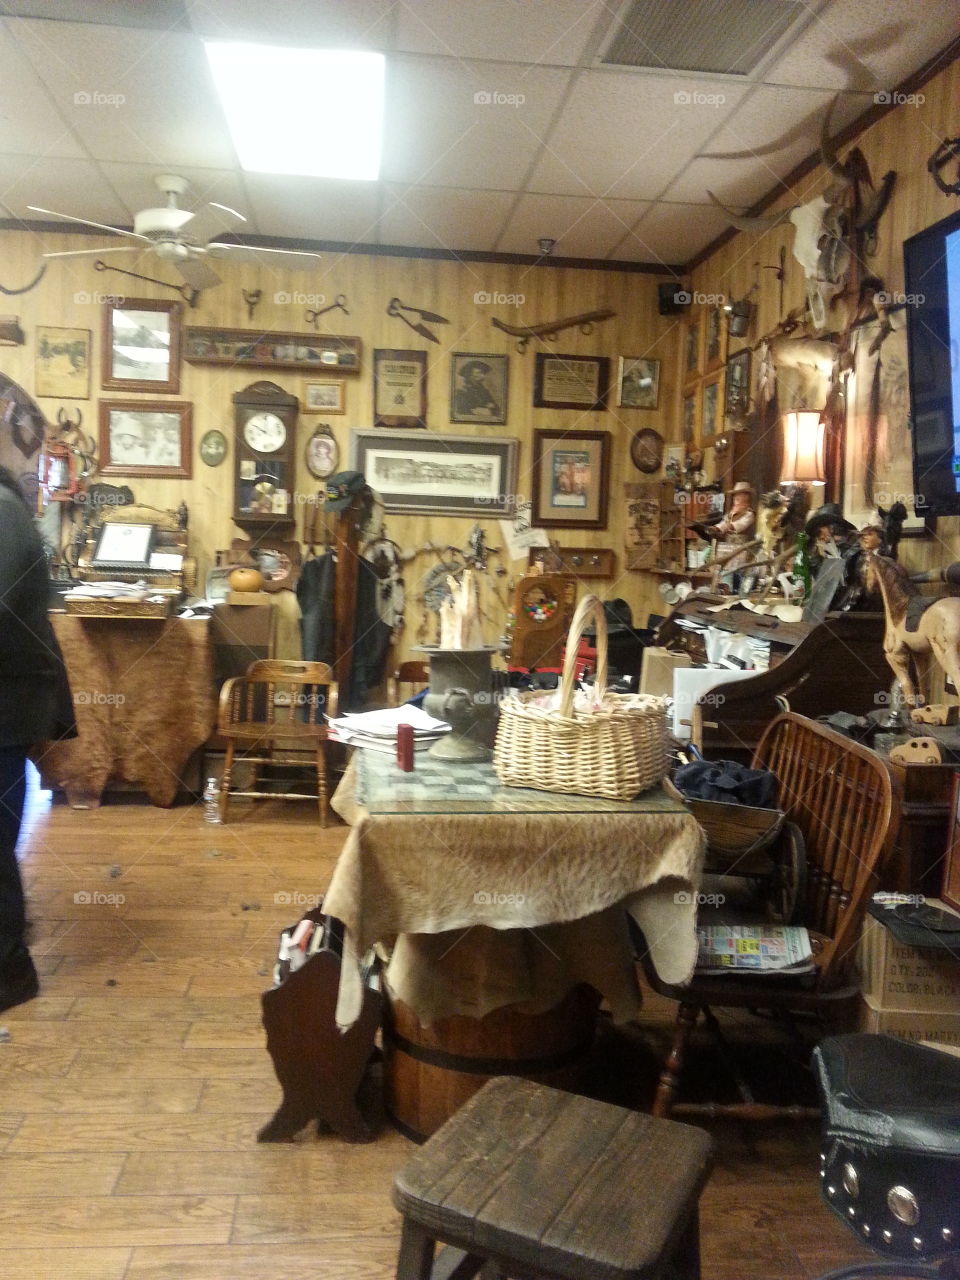 cliff's barber shop. getting my haircut